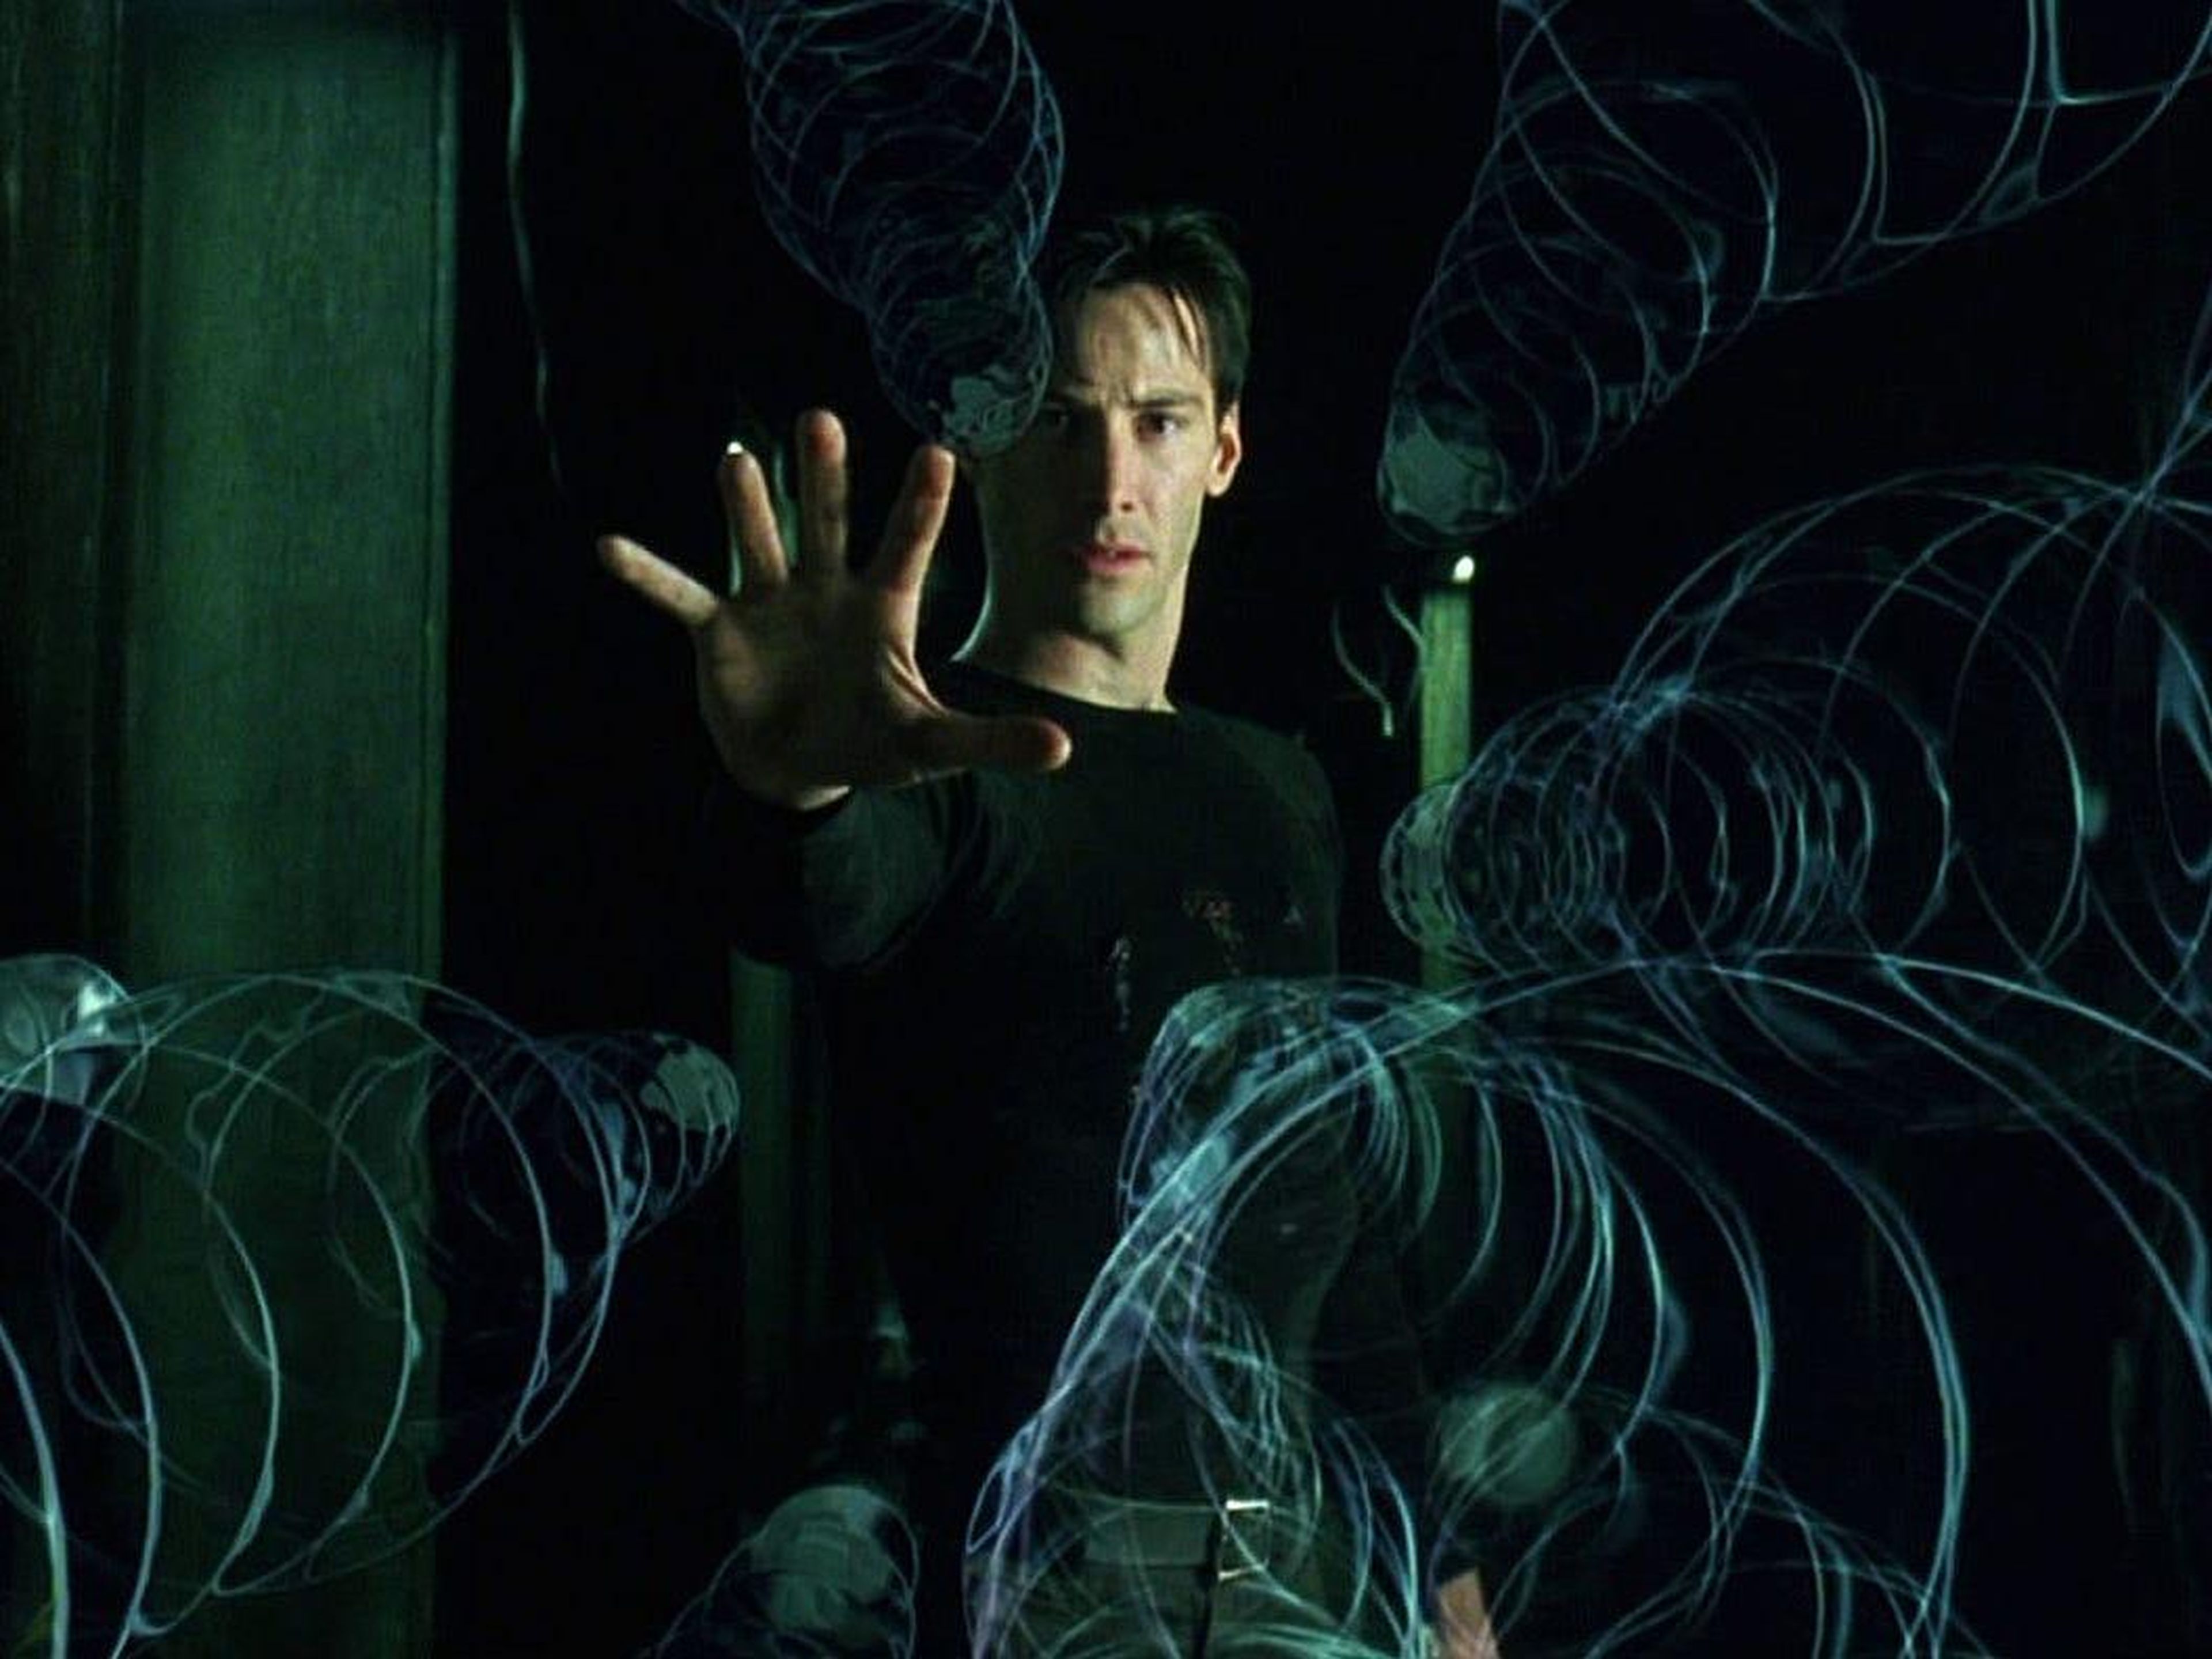 2. Keanu Reeves as Neo in "The Matrix" trilogy